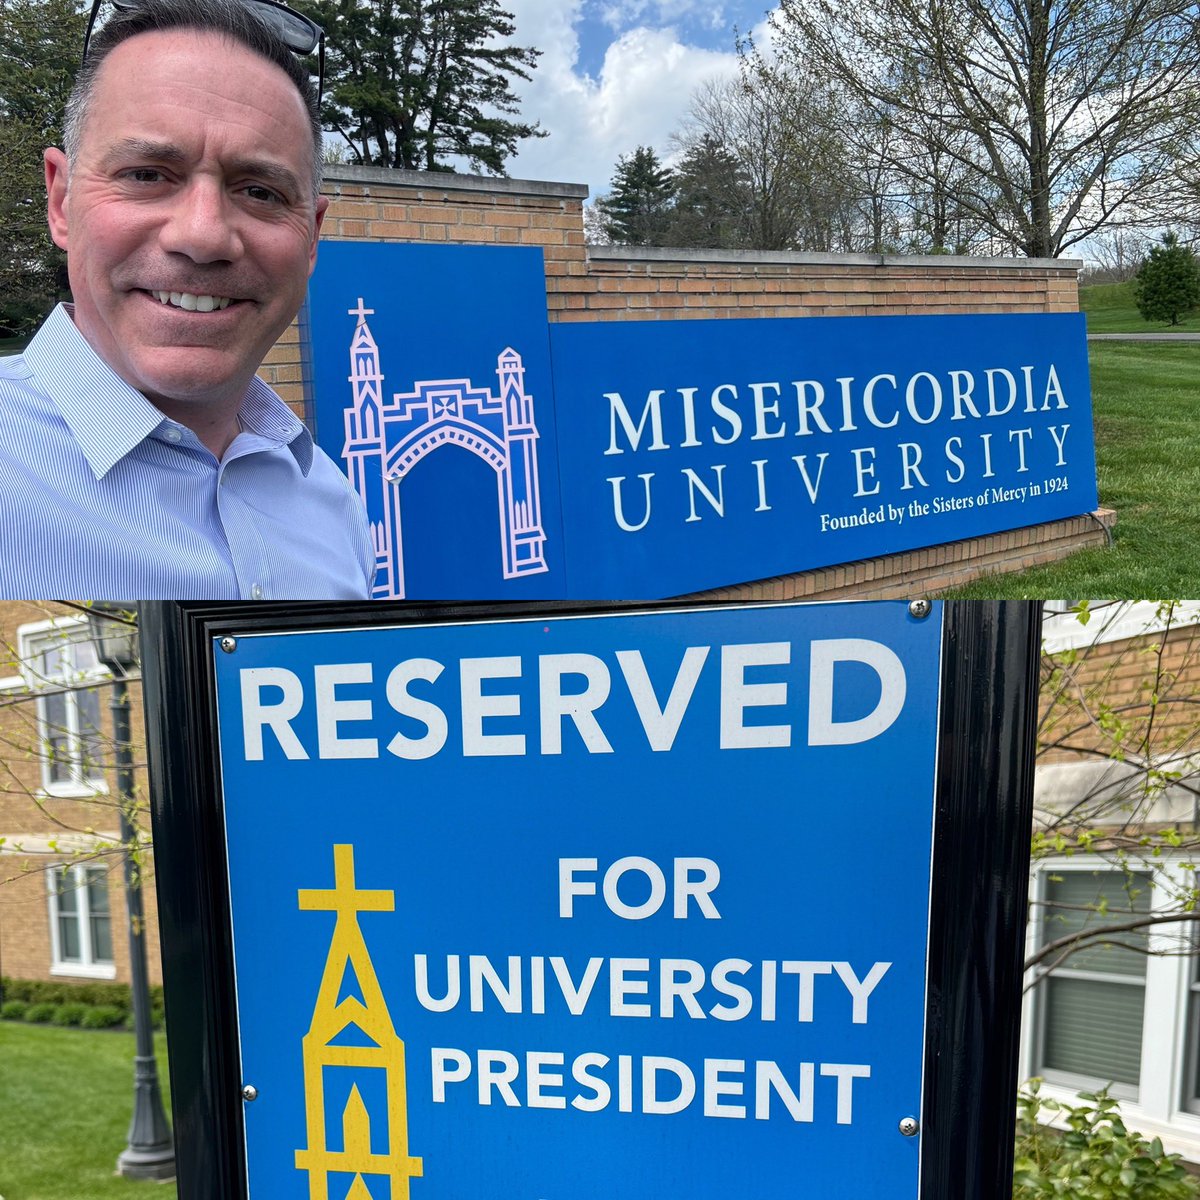 Excited to talk w @PresDanMyersMU @MisericordiaU LIVE on X at 3:15pm EST! Even offered me his parking spot! #survivethrive @JohnJBell15 @NotreDame @MisericordiAlum